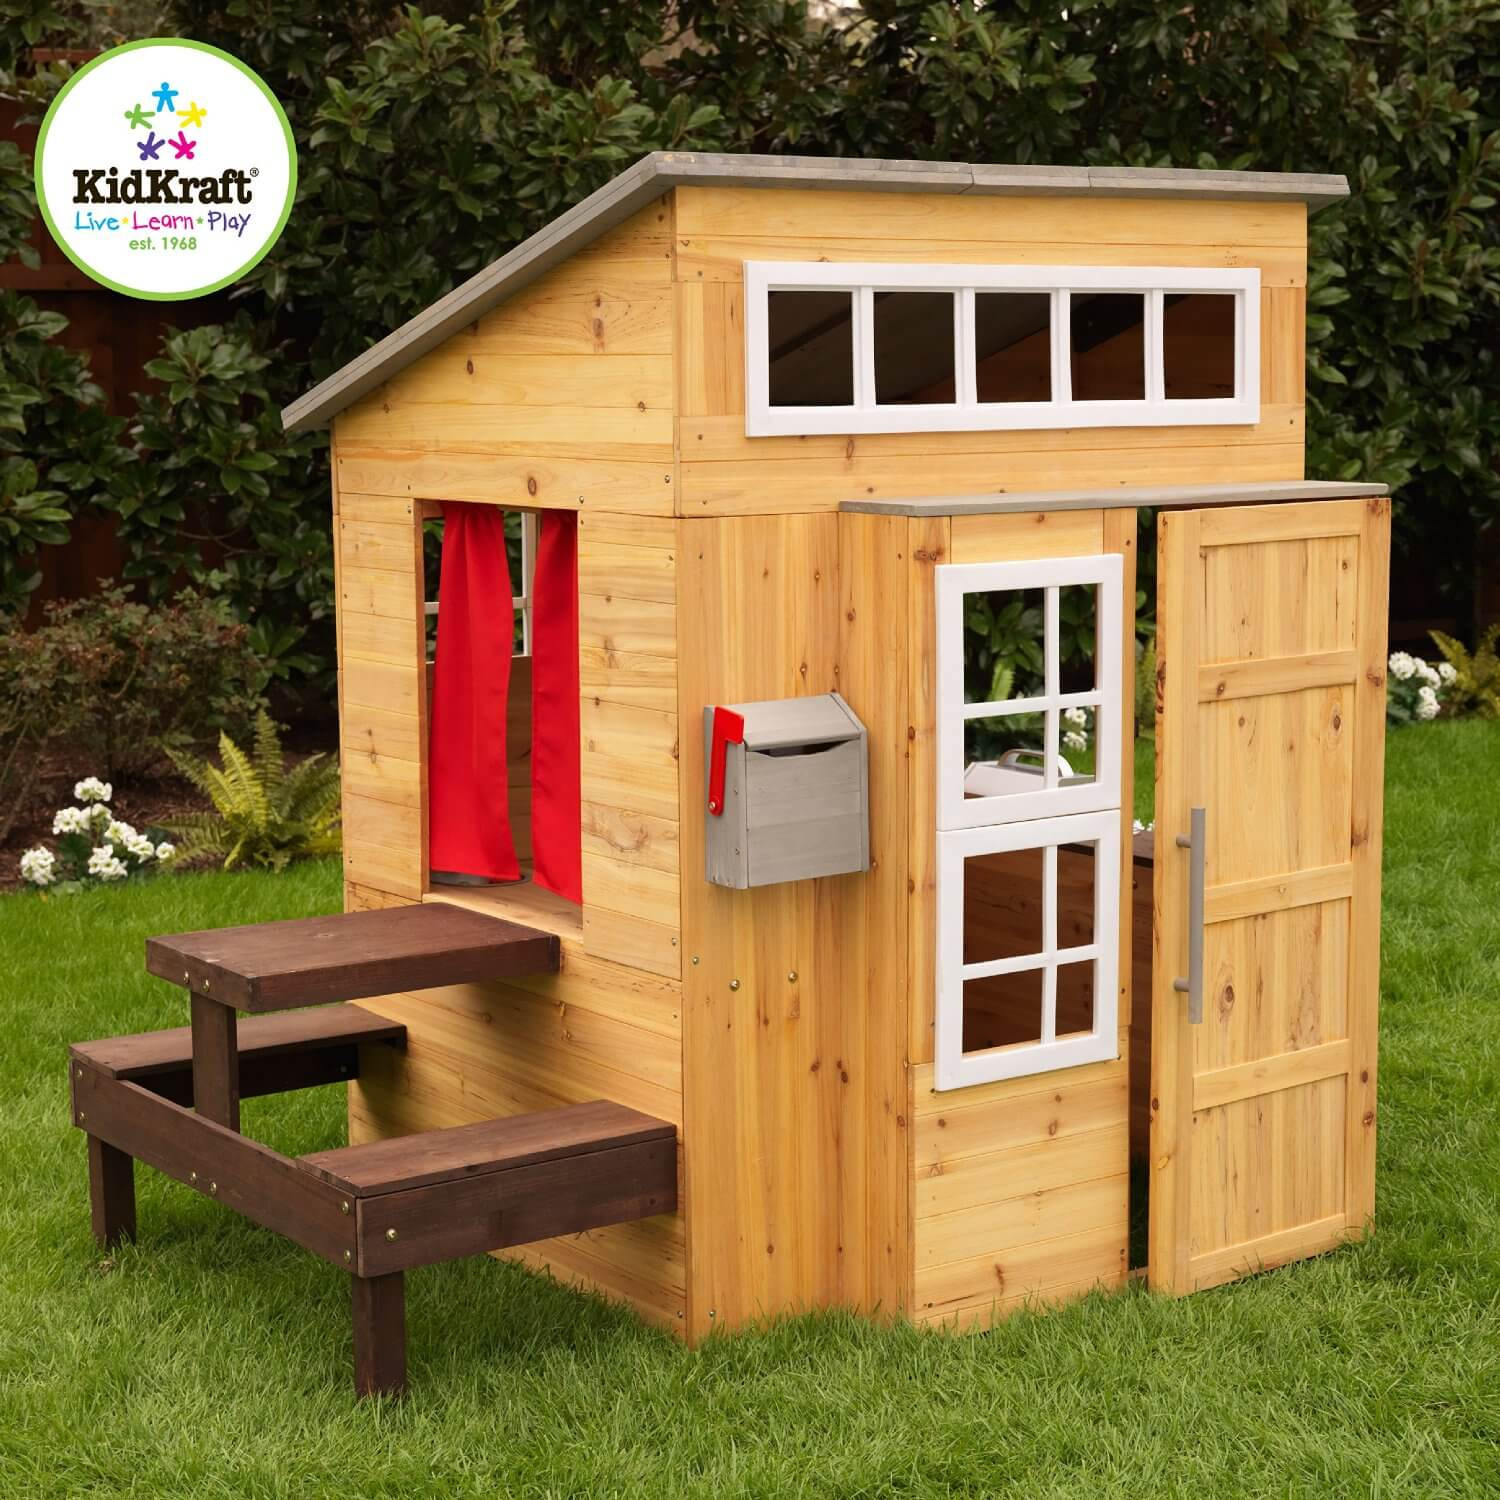 DIY Wood Playhouse
 How to Build a Playhouse with Wooden Pallets Step by Step